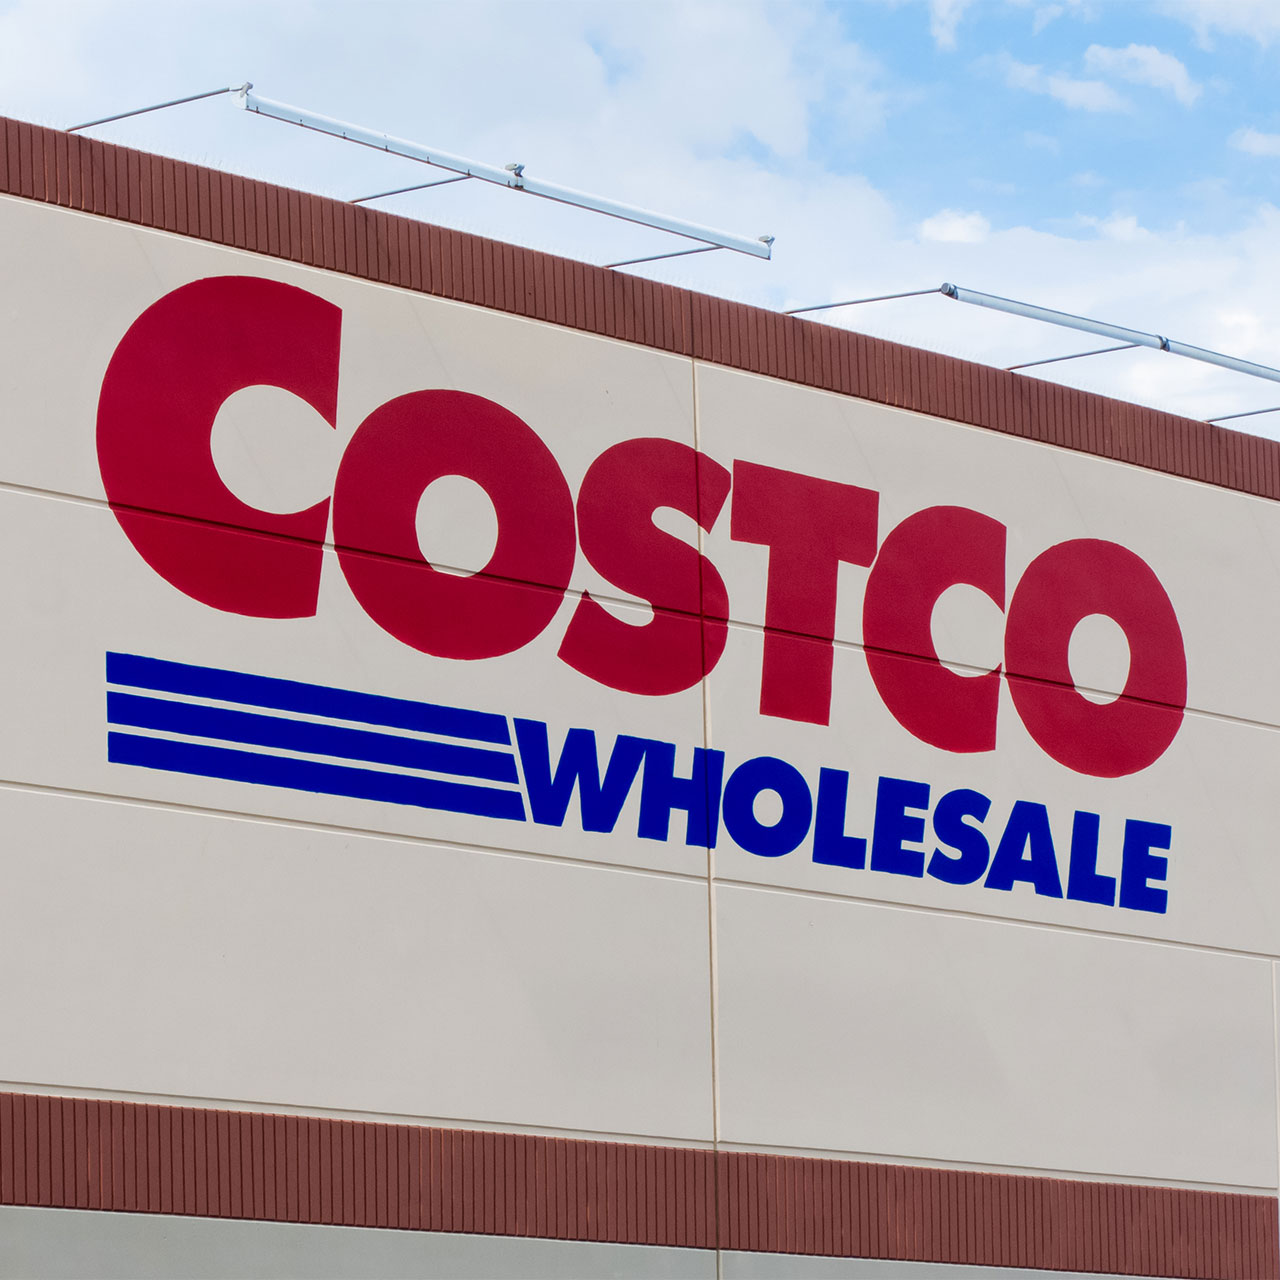 10 Costco Items That Have The Highest Ratings And Reviews: 'So